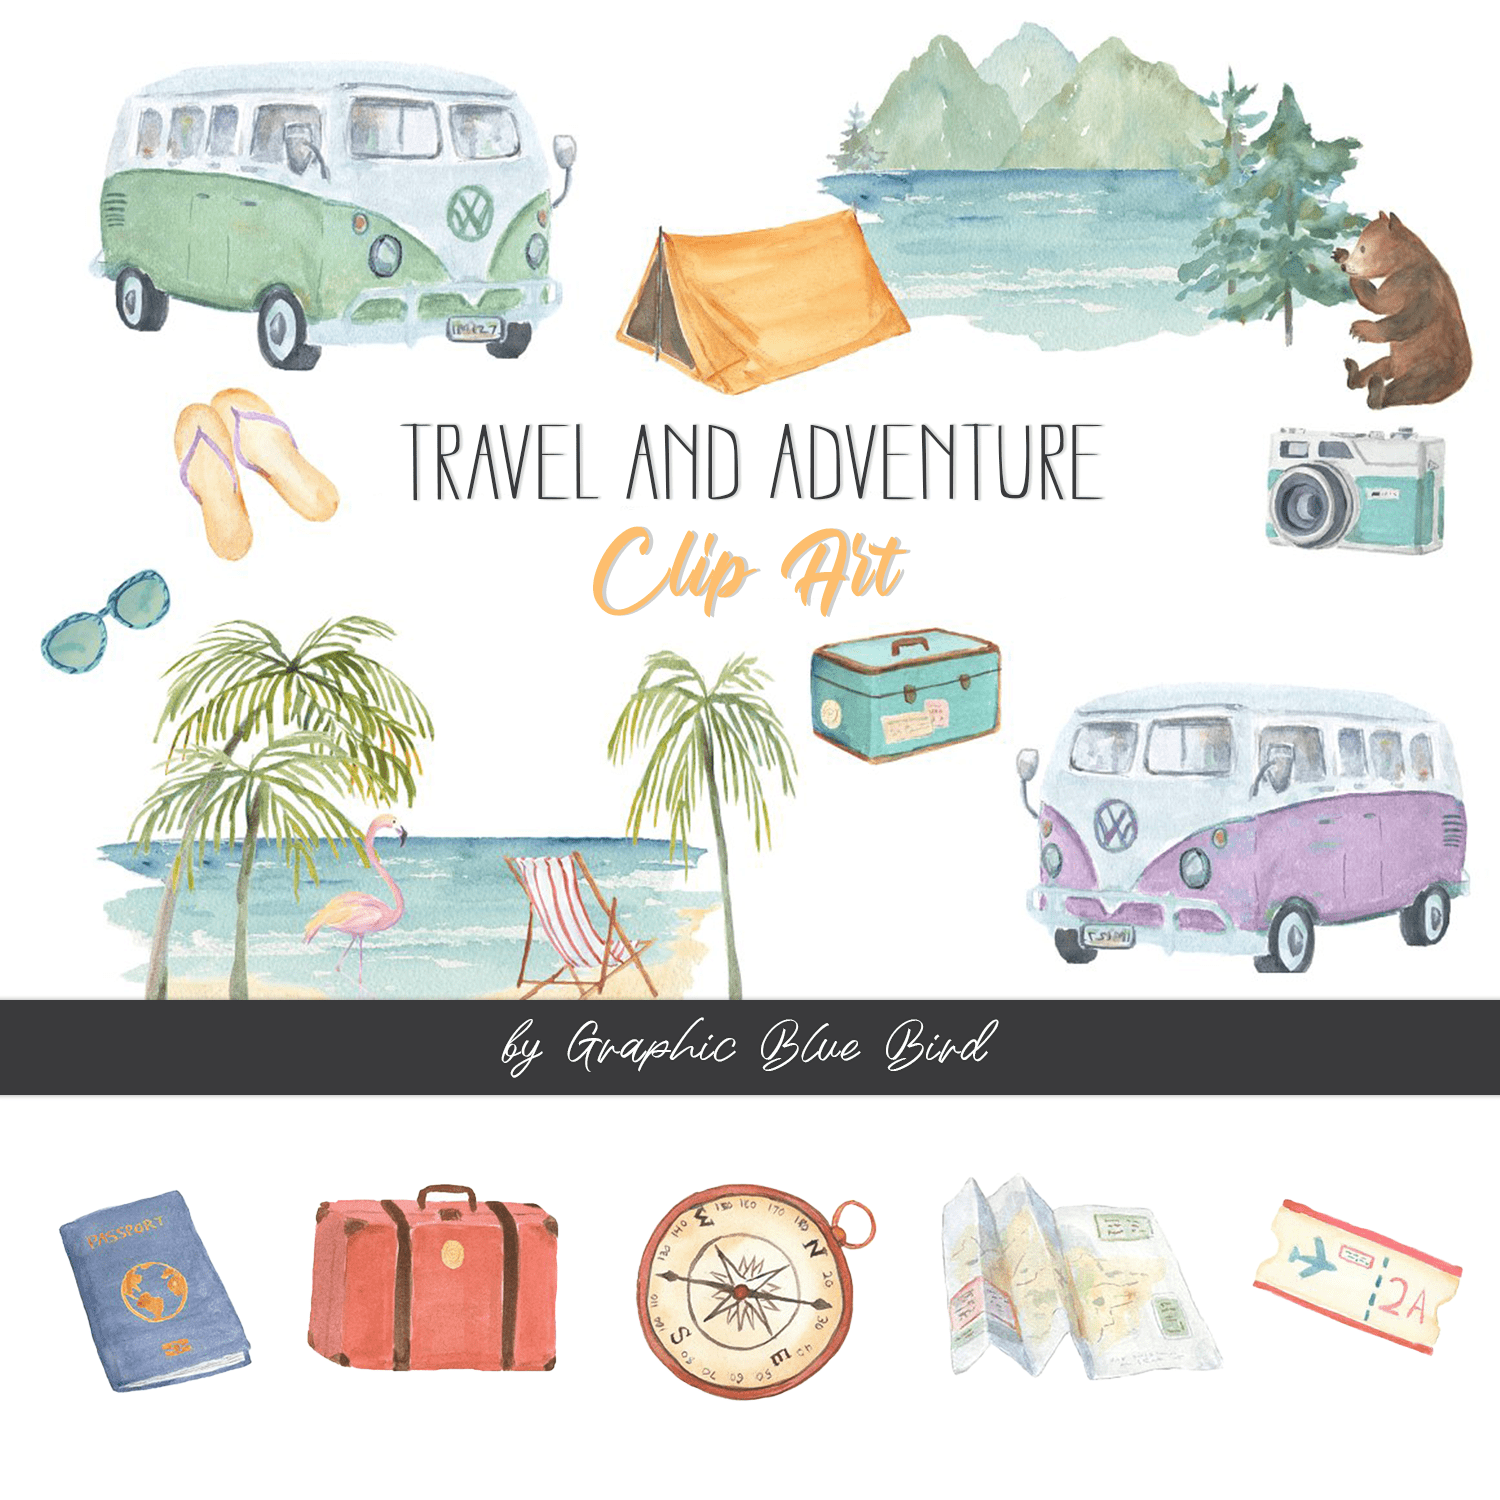 Travel and Adventure Clip Art cover.